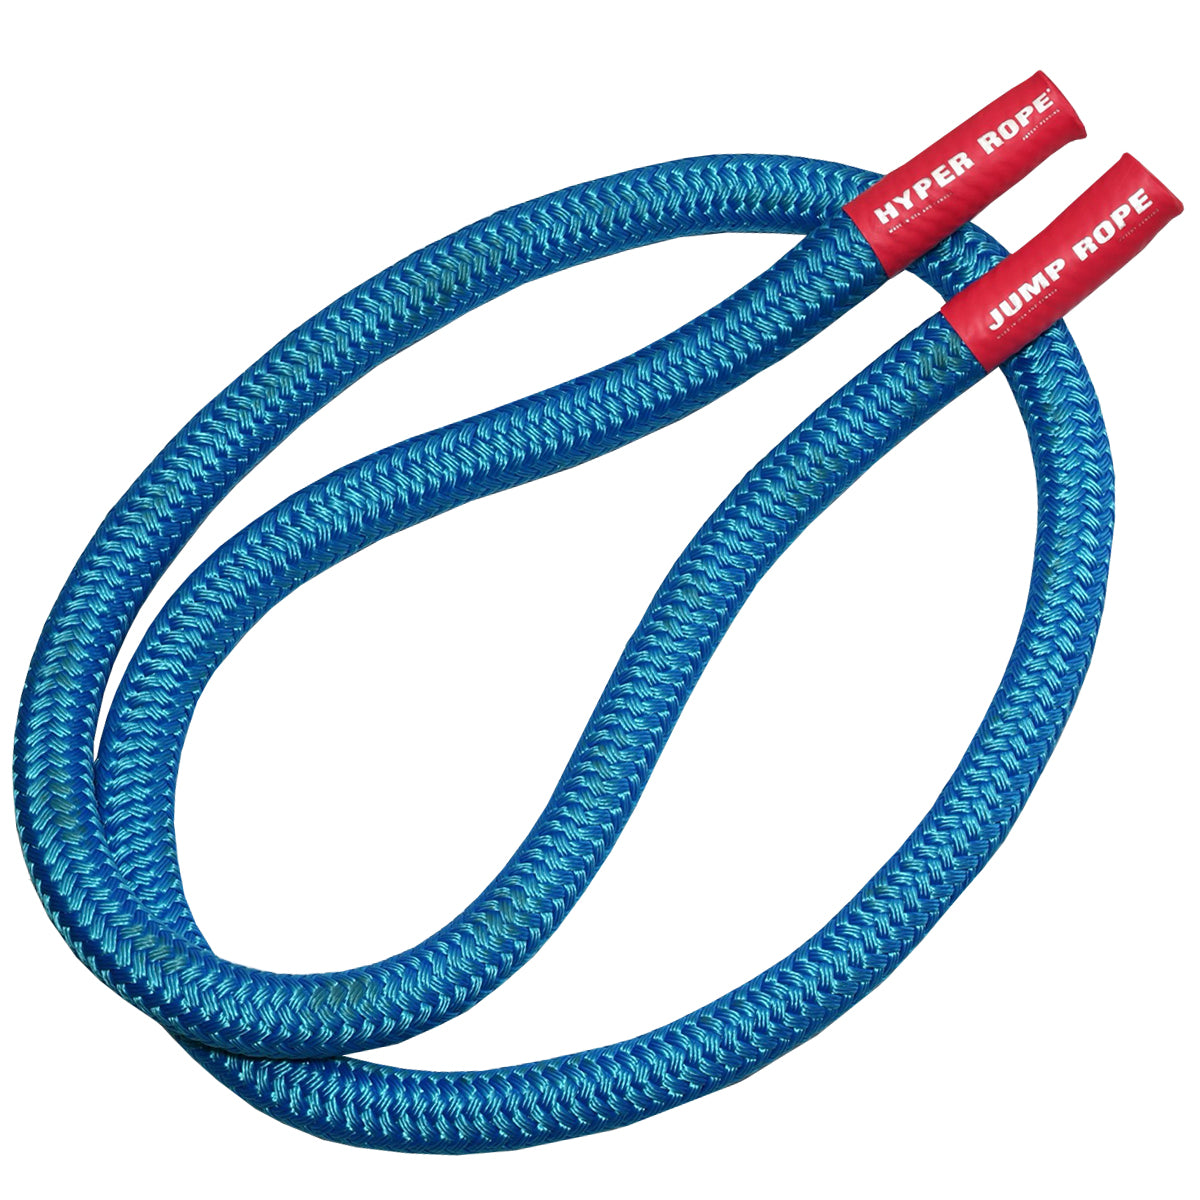 Hyper Rope®: Heaviest Weighted Jump Rope for Intense Training - Hyperw »  Hyperwear